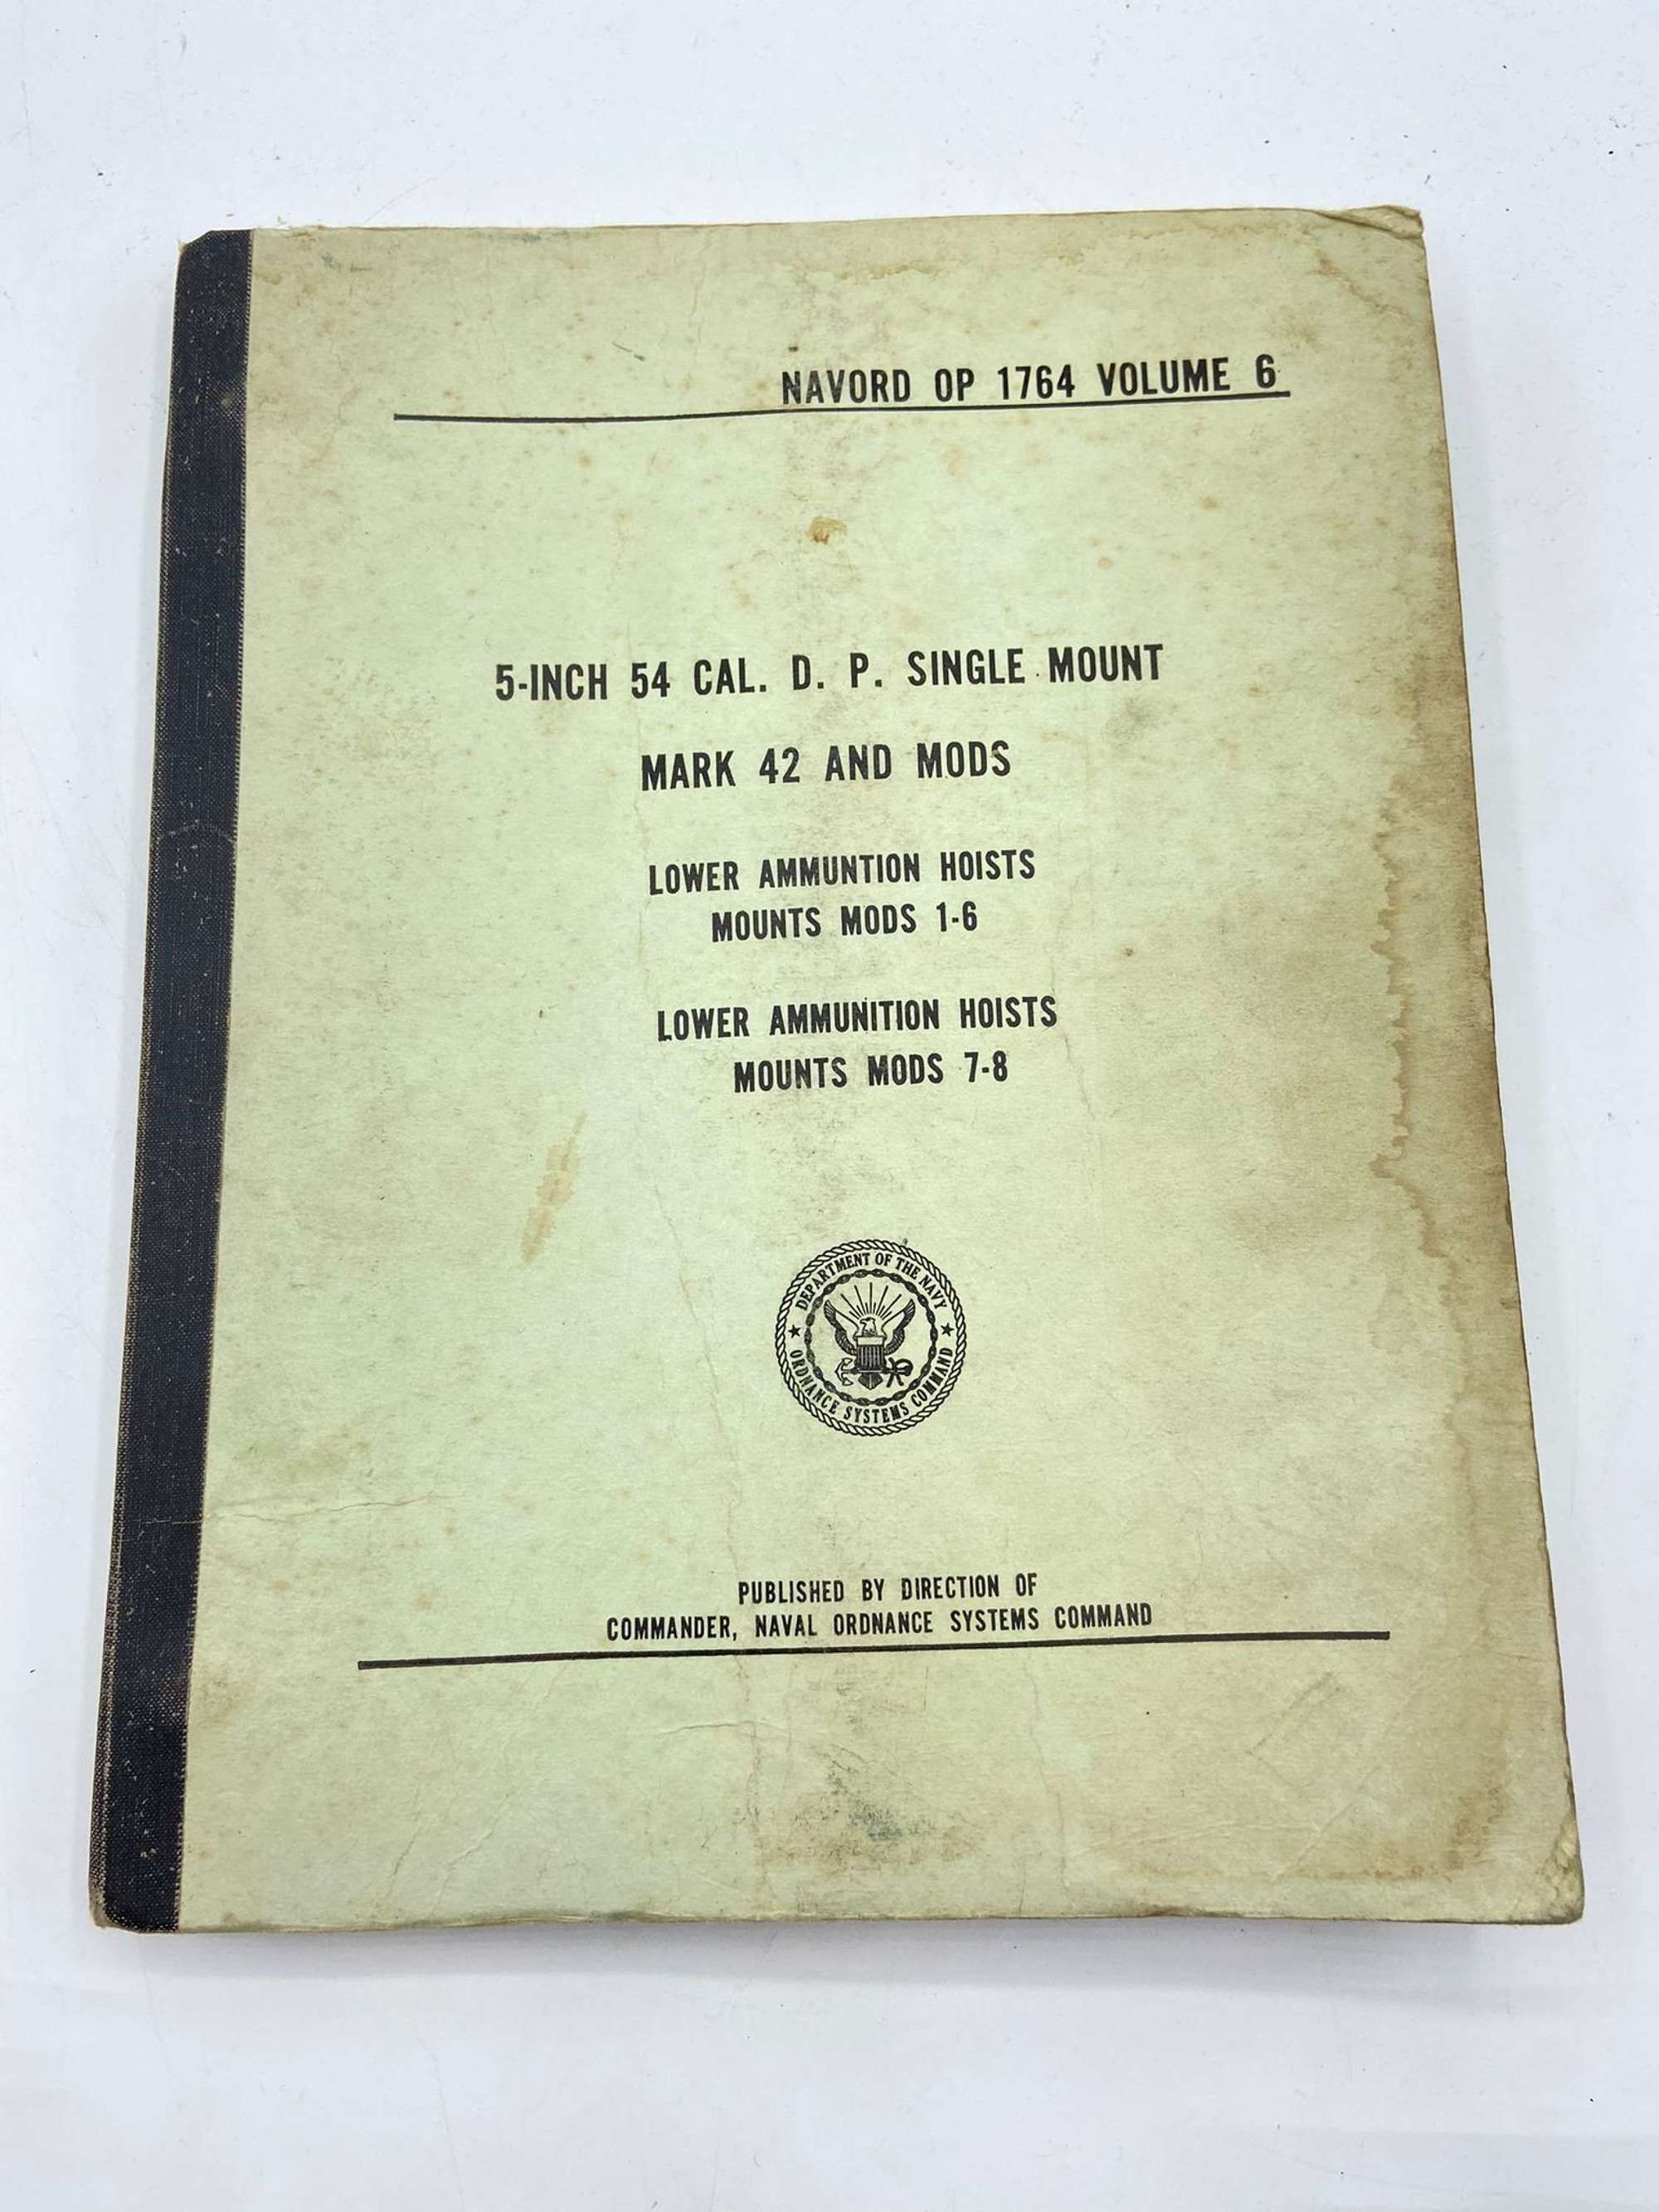 WW2 United States Navy Manual For Single Mount Mark 42 5